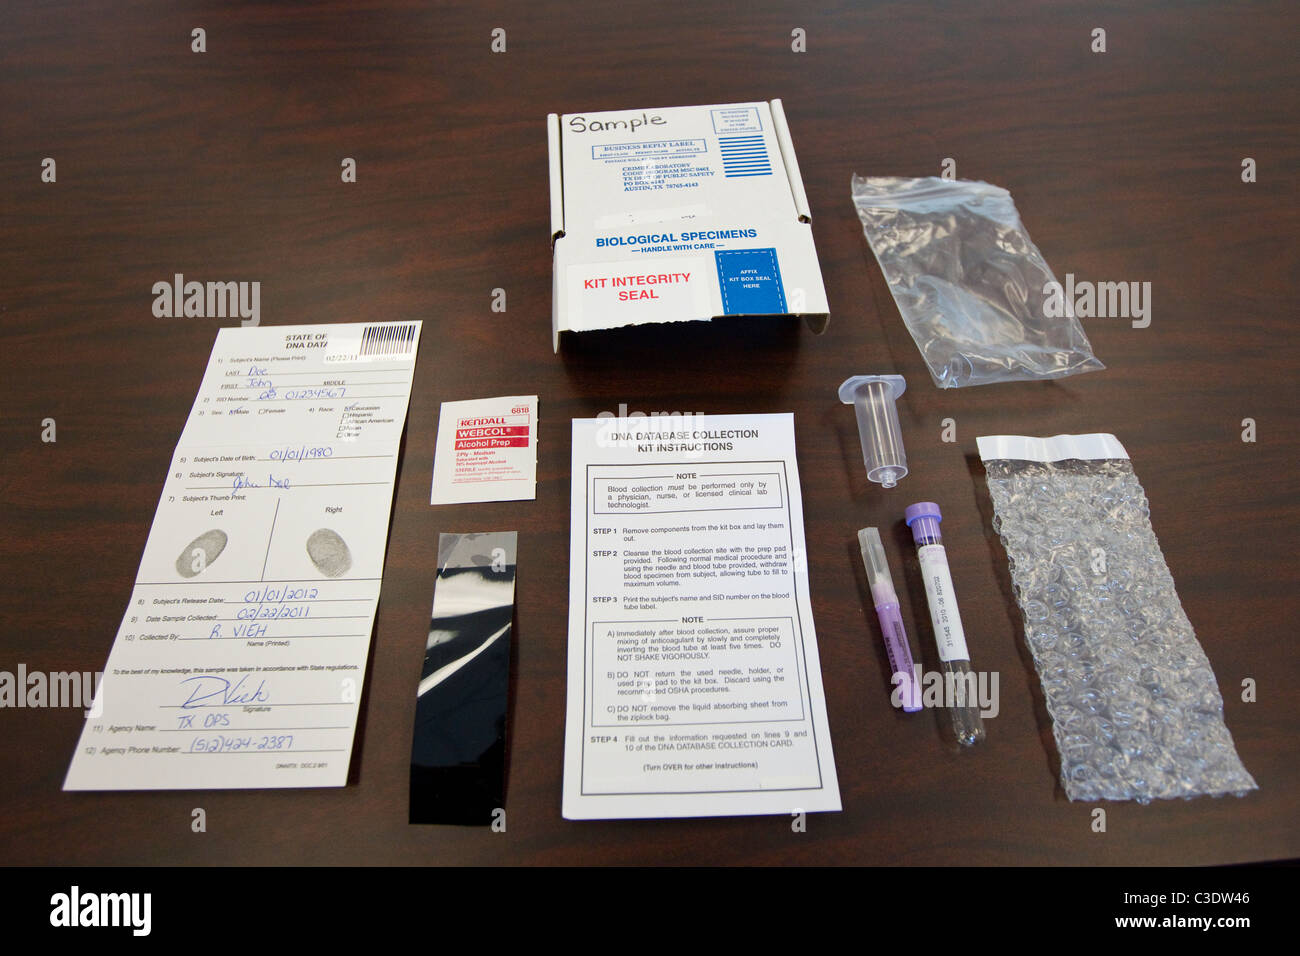 Evidence in a criminal case is displayed on a tabletop at the Texas Dept. of Public Safety Crime Lab in Austin Texas Stock Photo